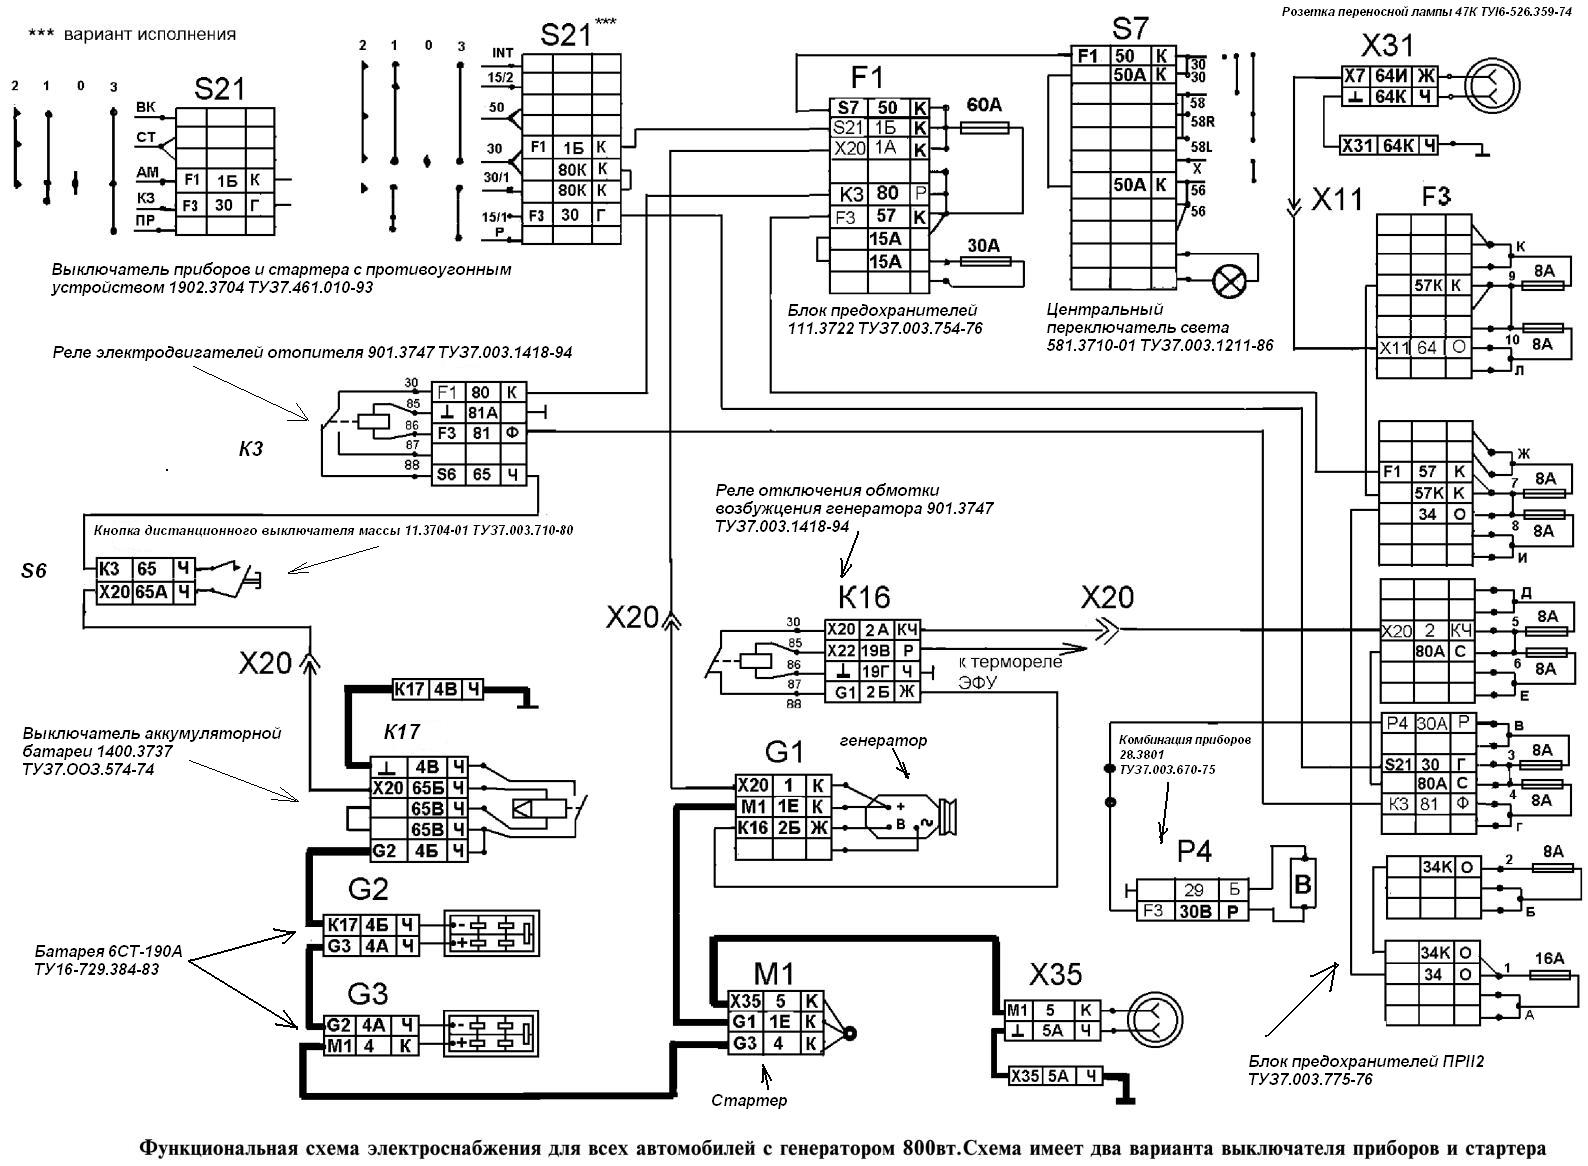 power supply diagram for Kamaz vehicles with 800 W generator